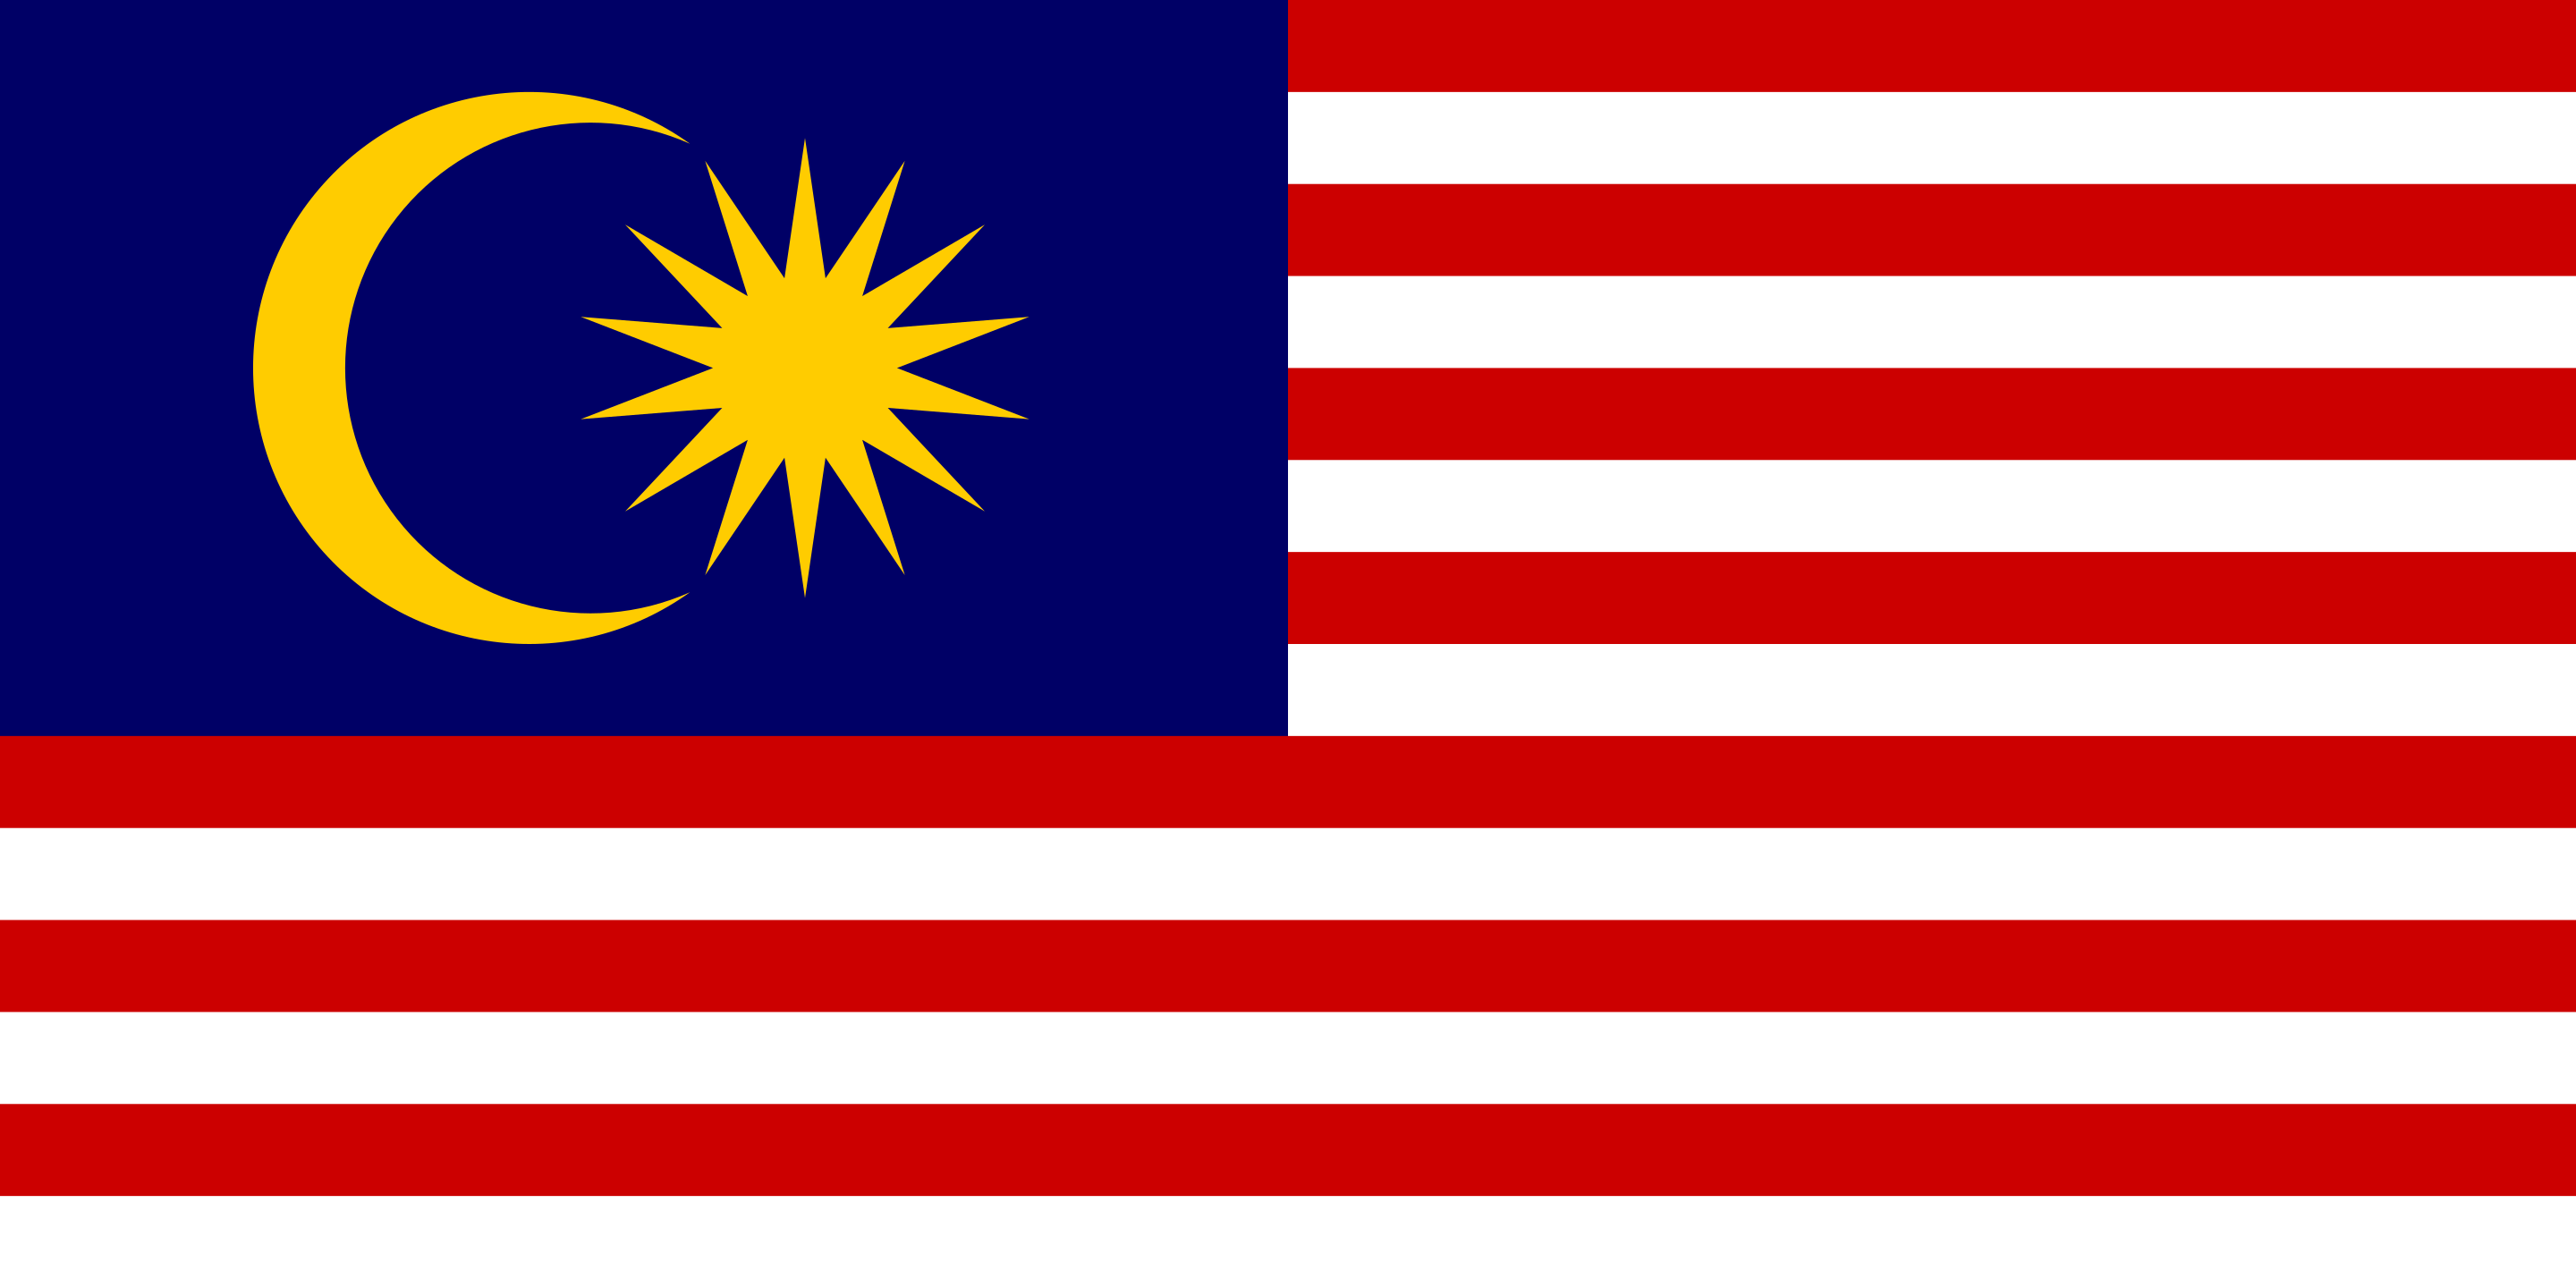 Jalur gemilang with 13 stripes